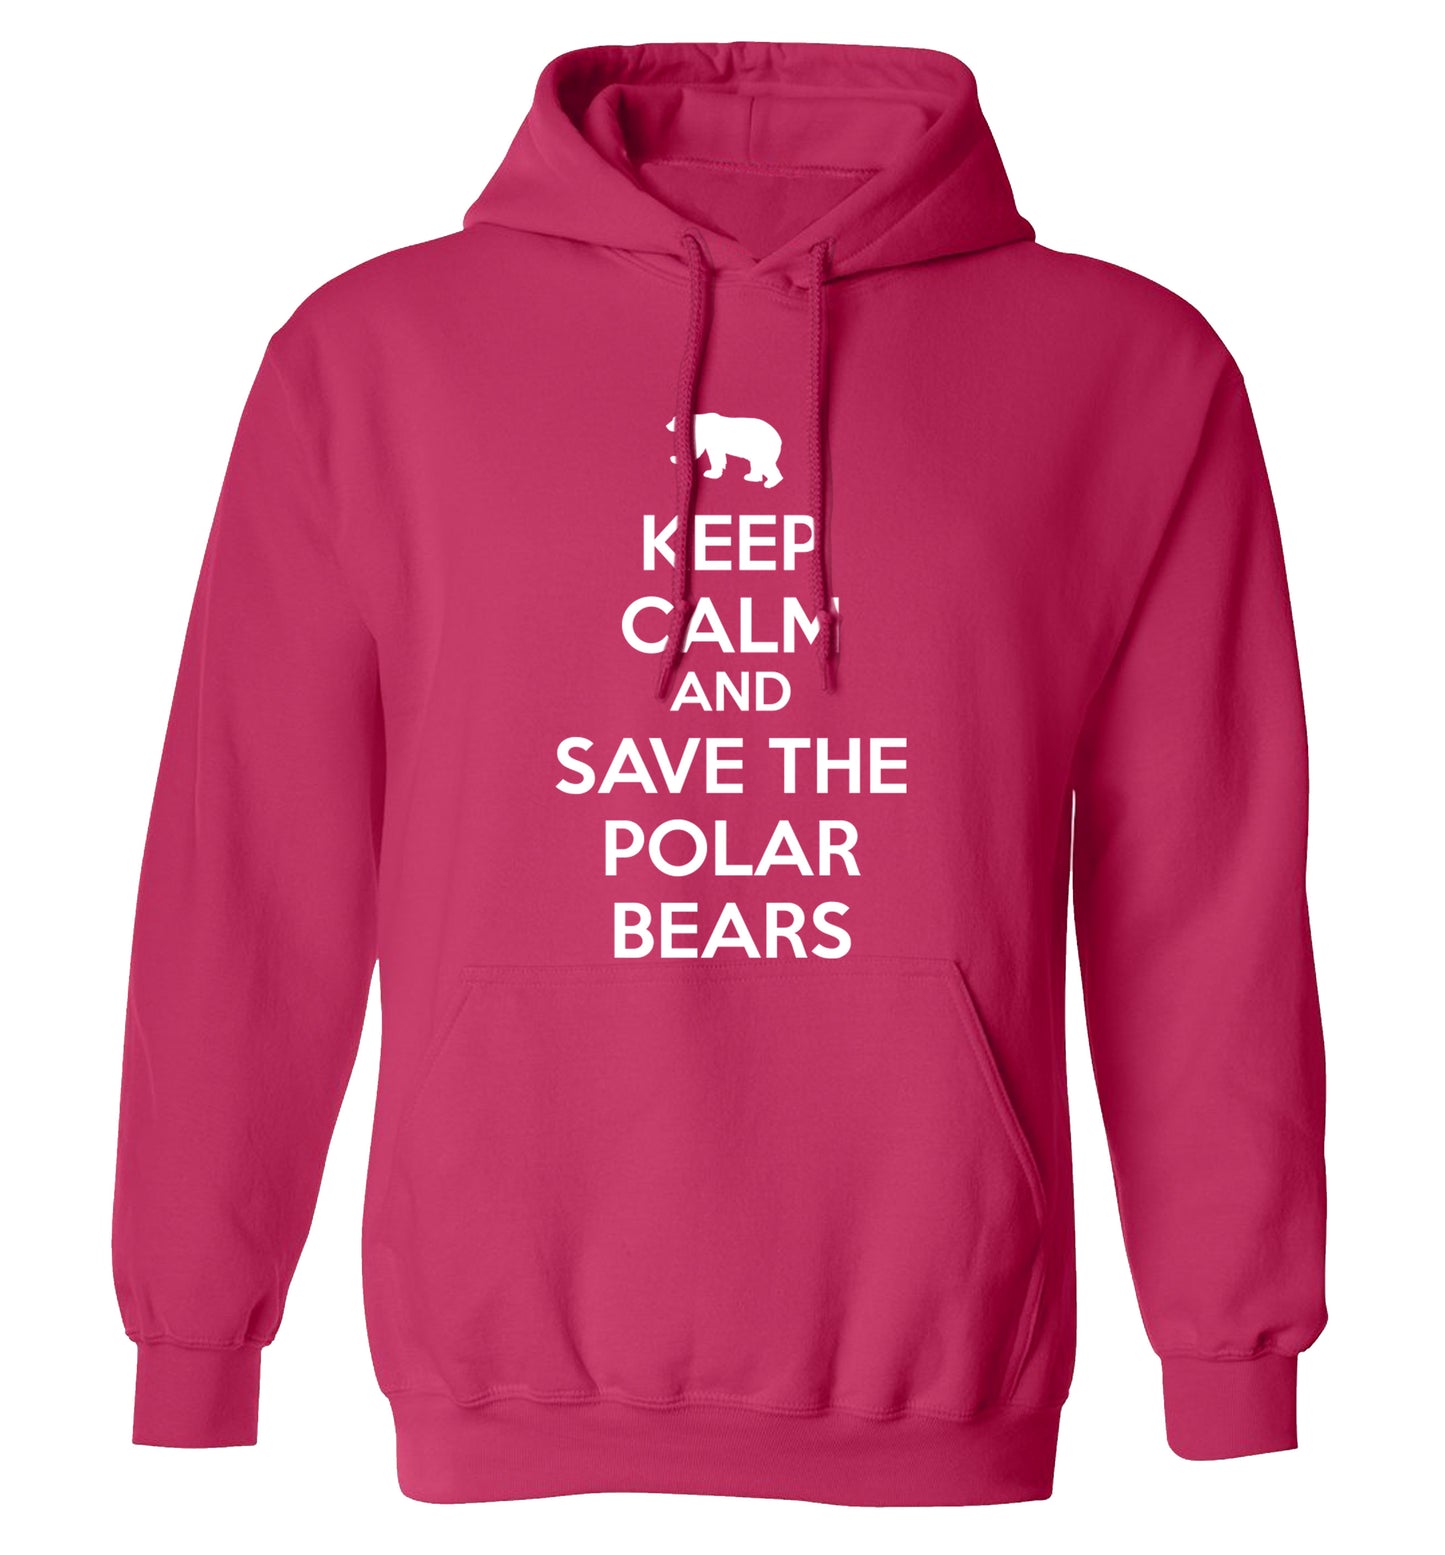 Keep calm and save the polar bears adults unisex pink hoodie 2XL